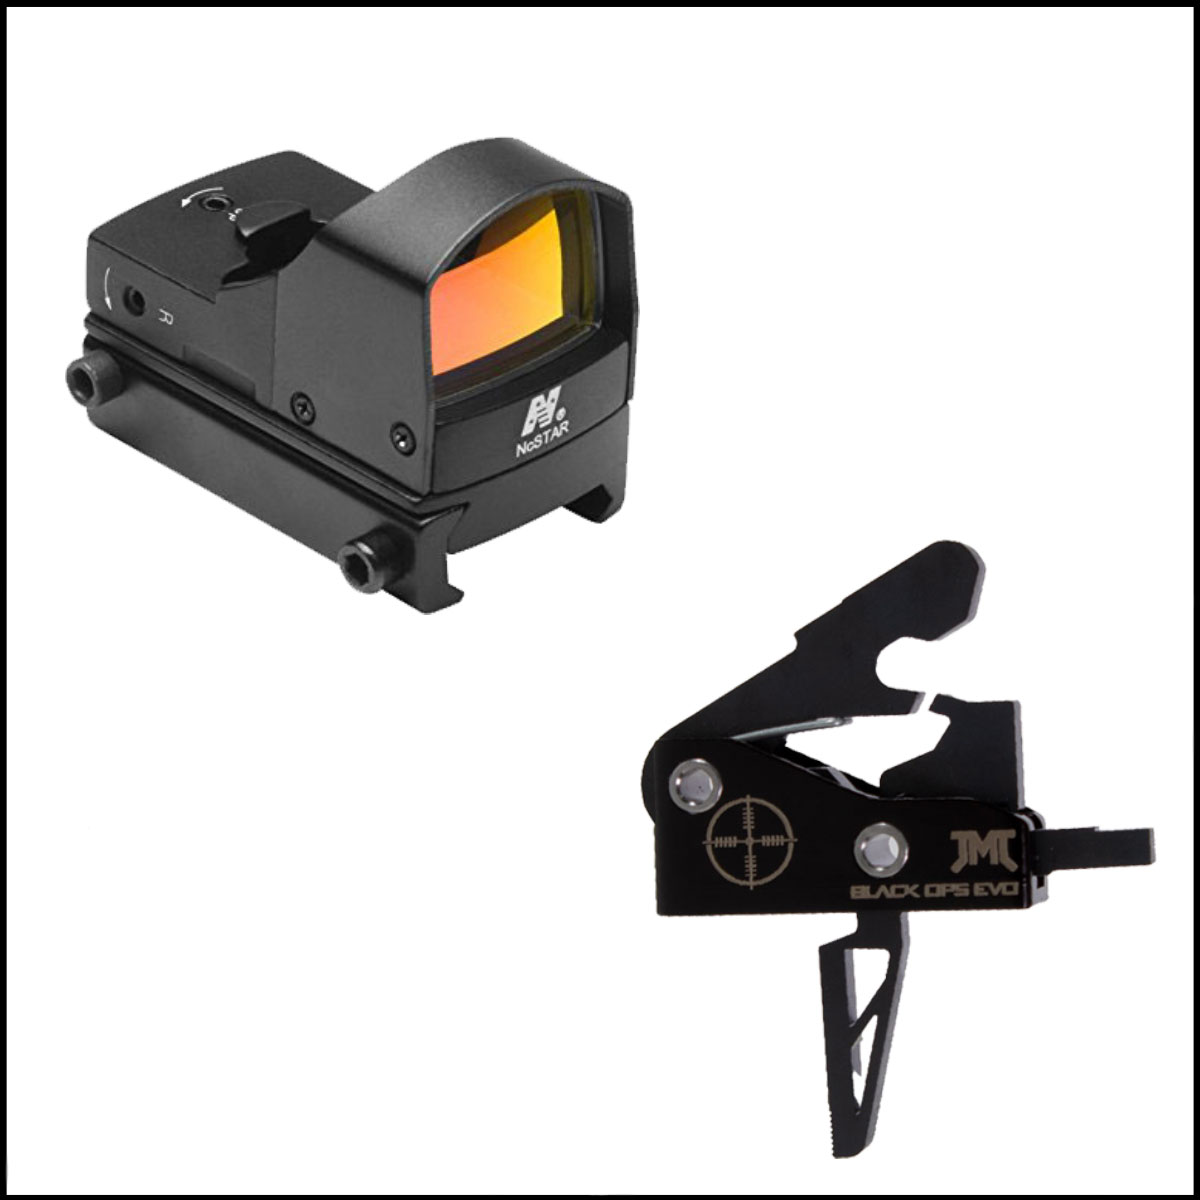 RDS Combo: DDAB Tactical Red Dot Mini Reflex Sight + James Madison Tactical Drop-In Trigger